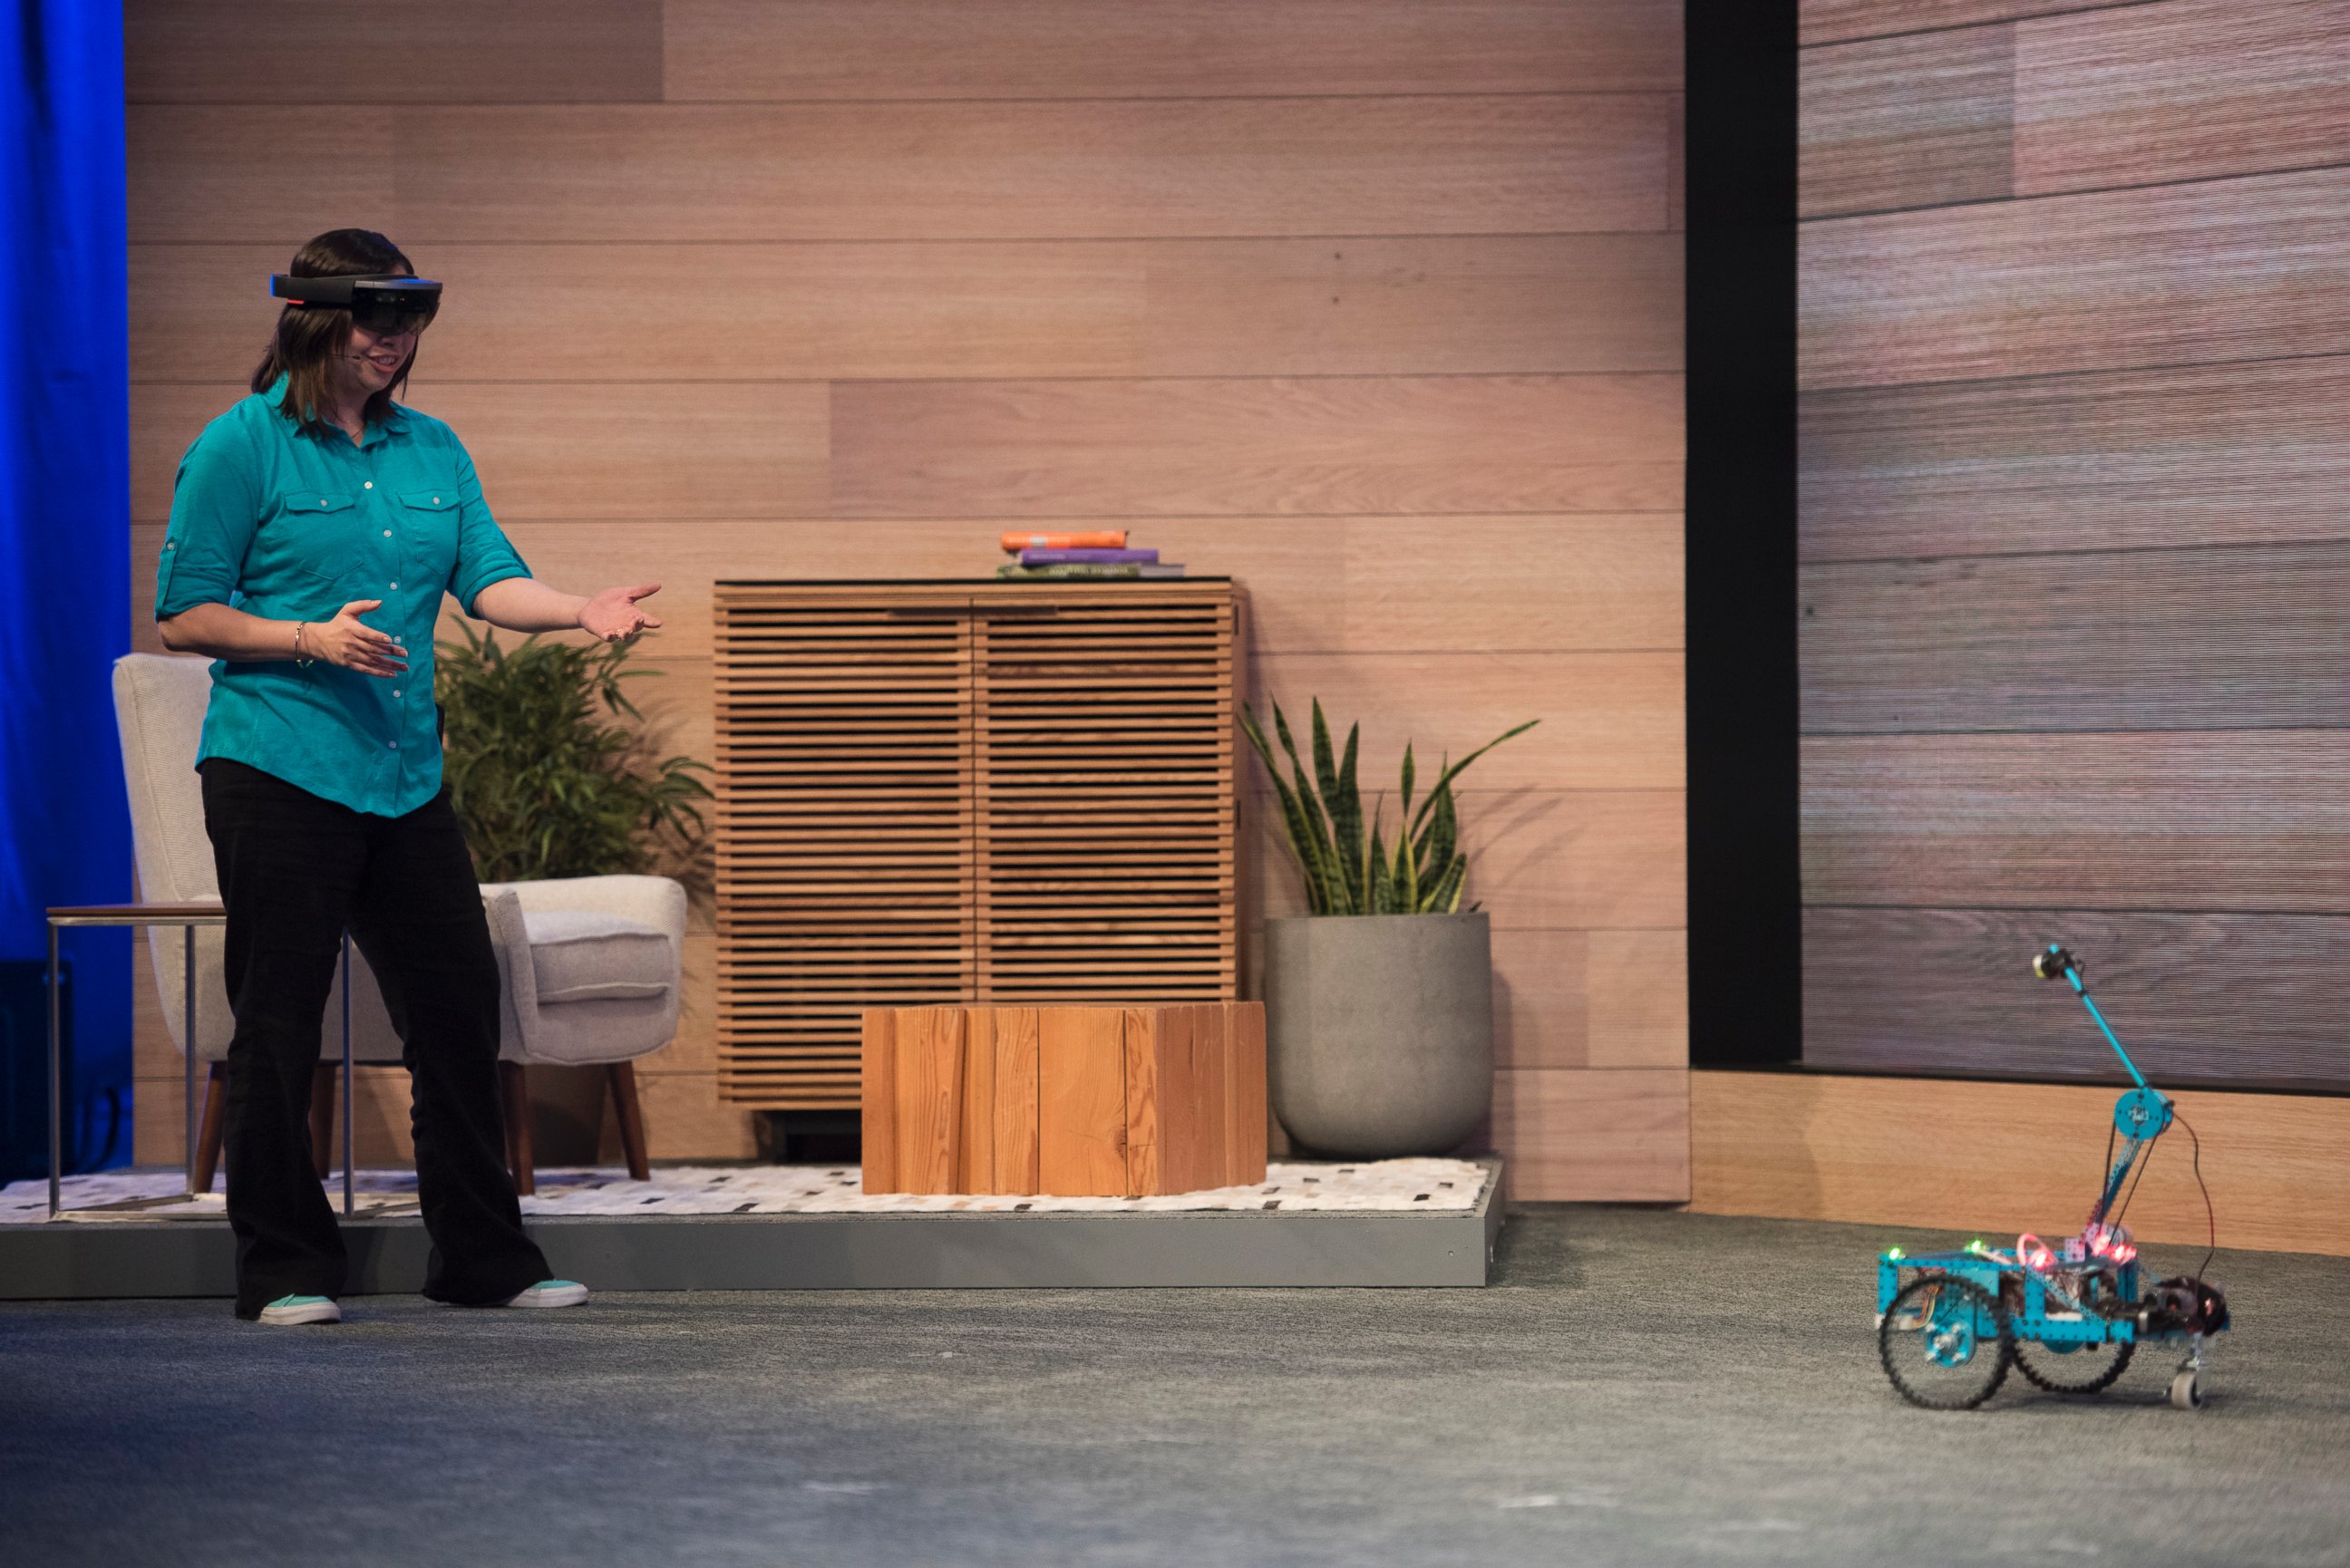 PHOTO: The Microsoft Corp. HoloLens augmented reality headset is demonstrated during a keynote session at the Microsoft Developers Build Conference in San Francisco on April 29, 2015.